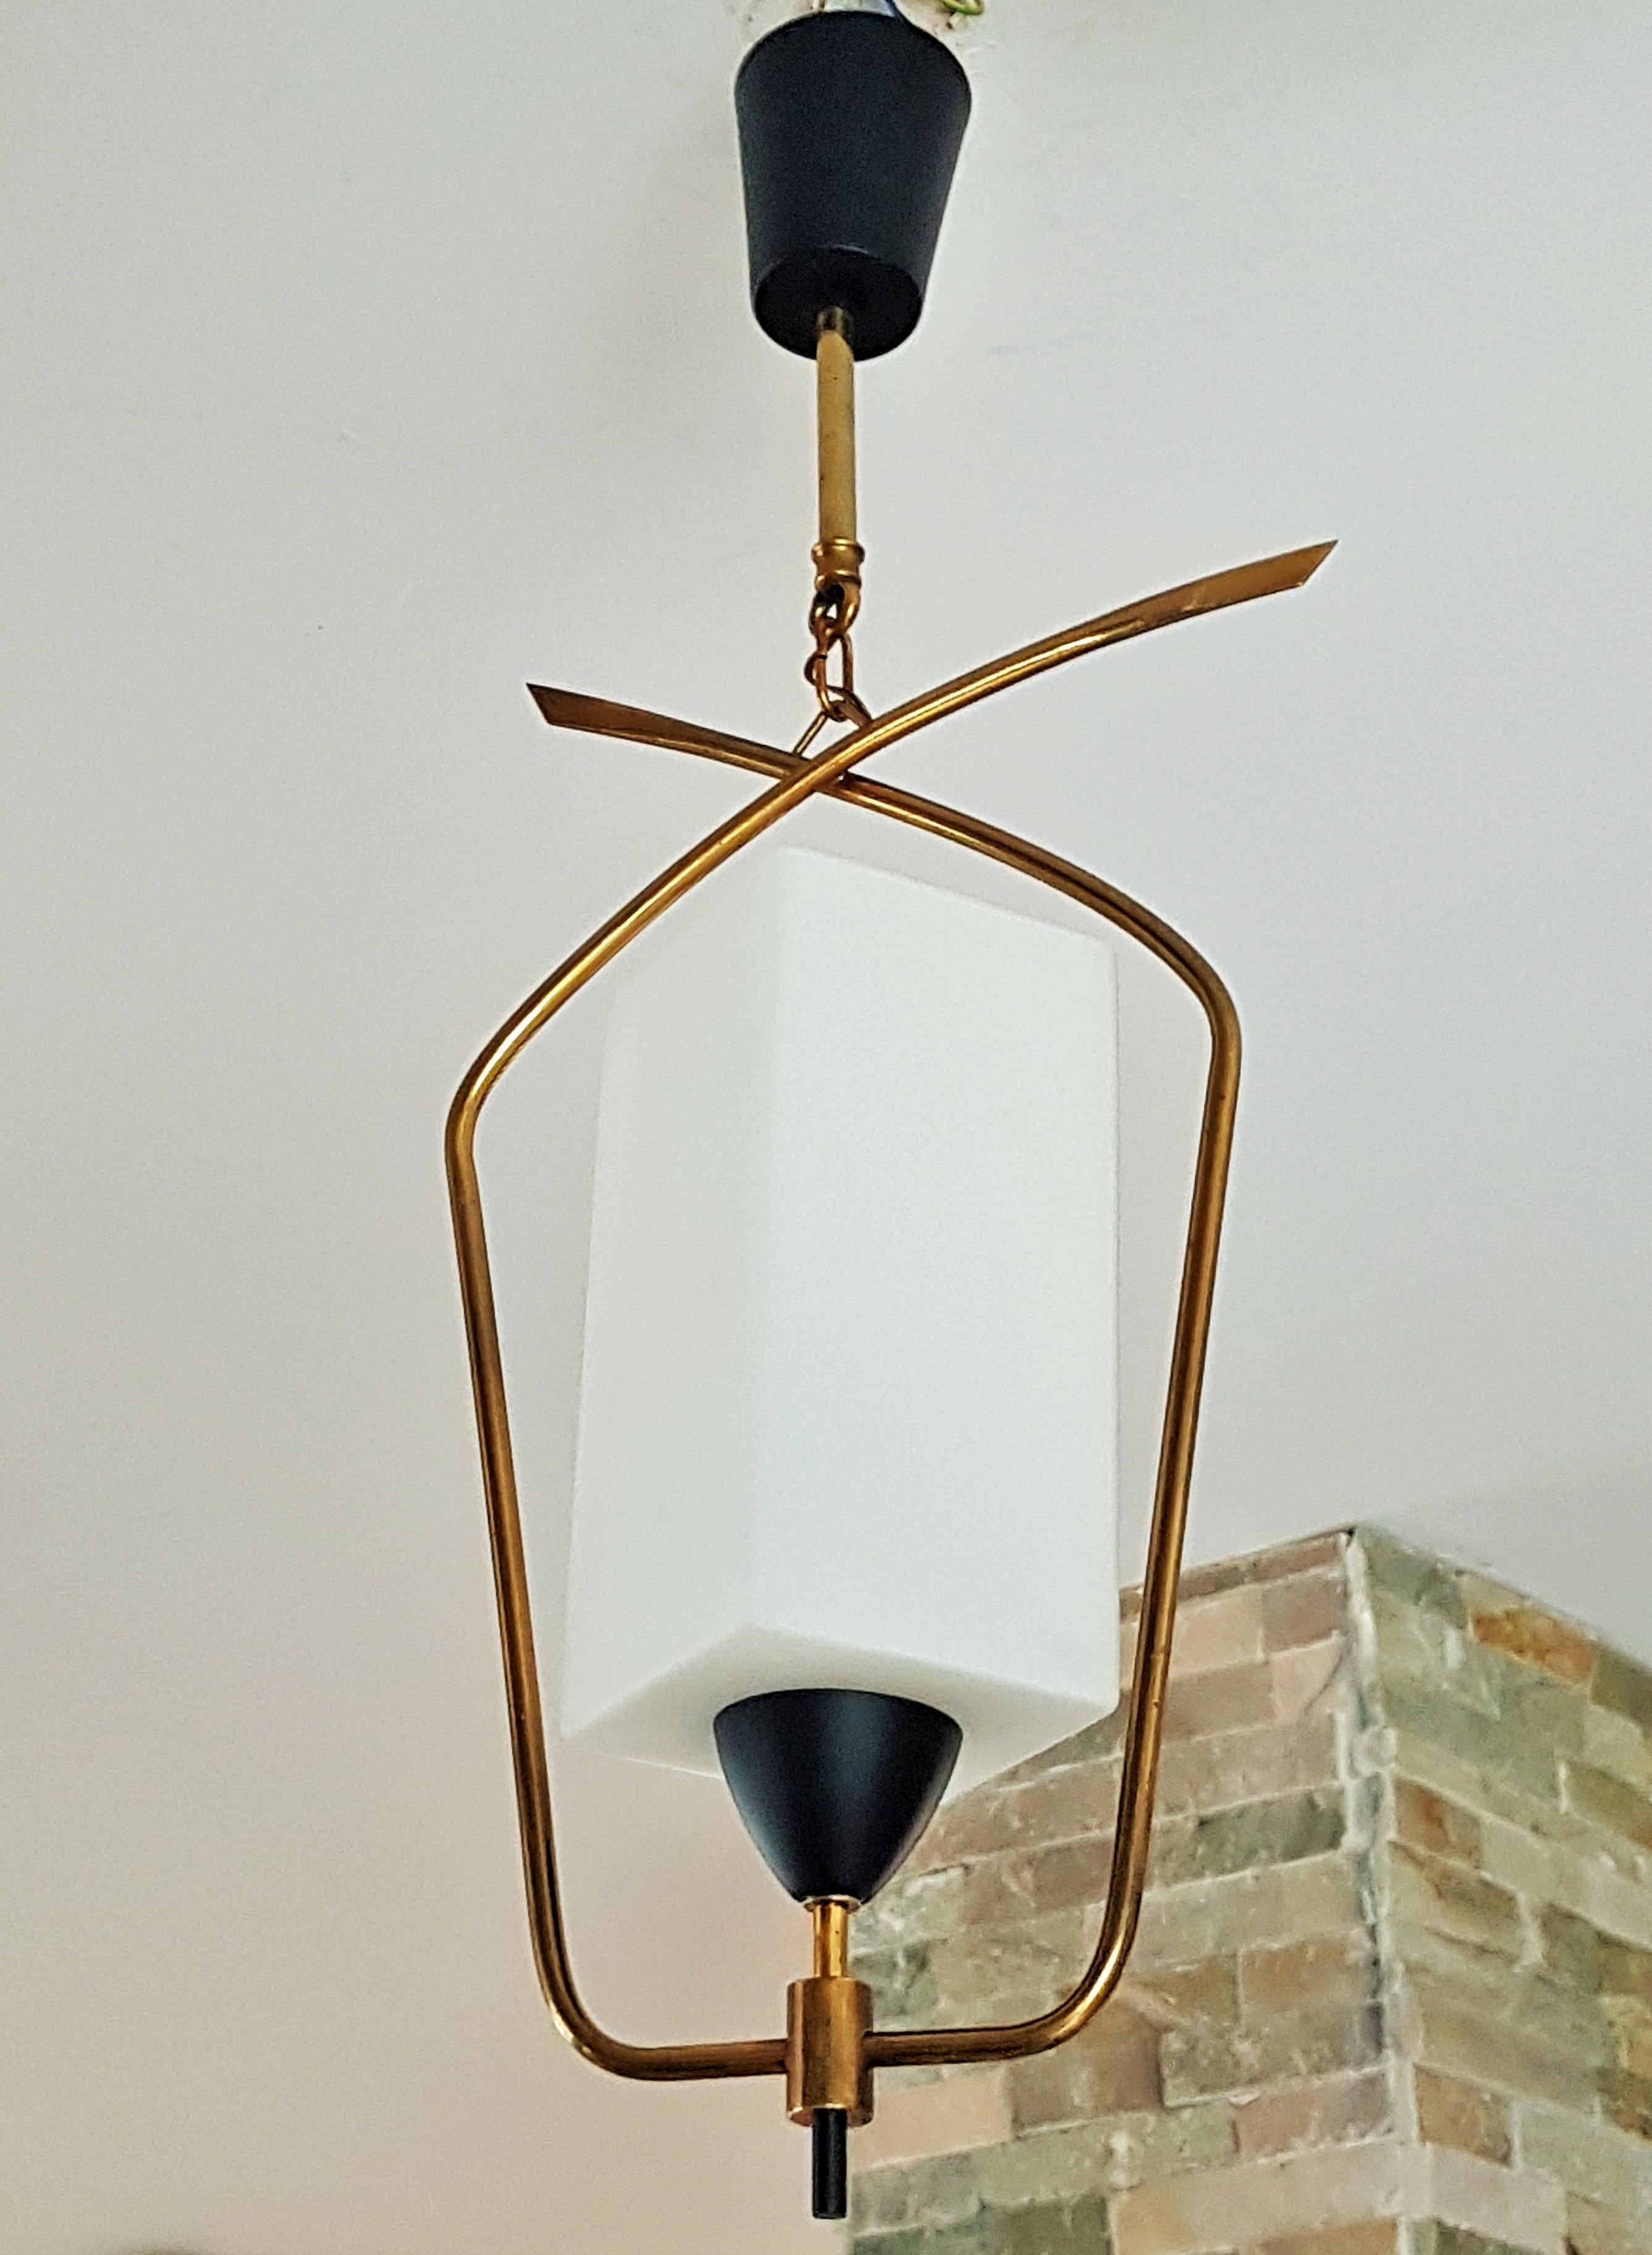 Midcentury Brass and Glass Pendant Lantern by Arlus Lunel, France, 1950 For Sale 5